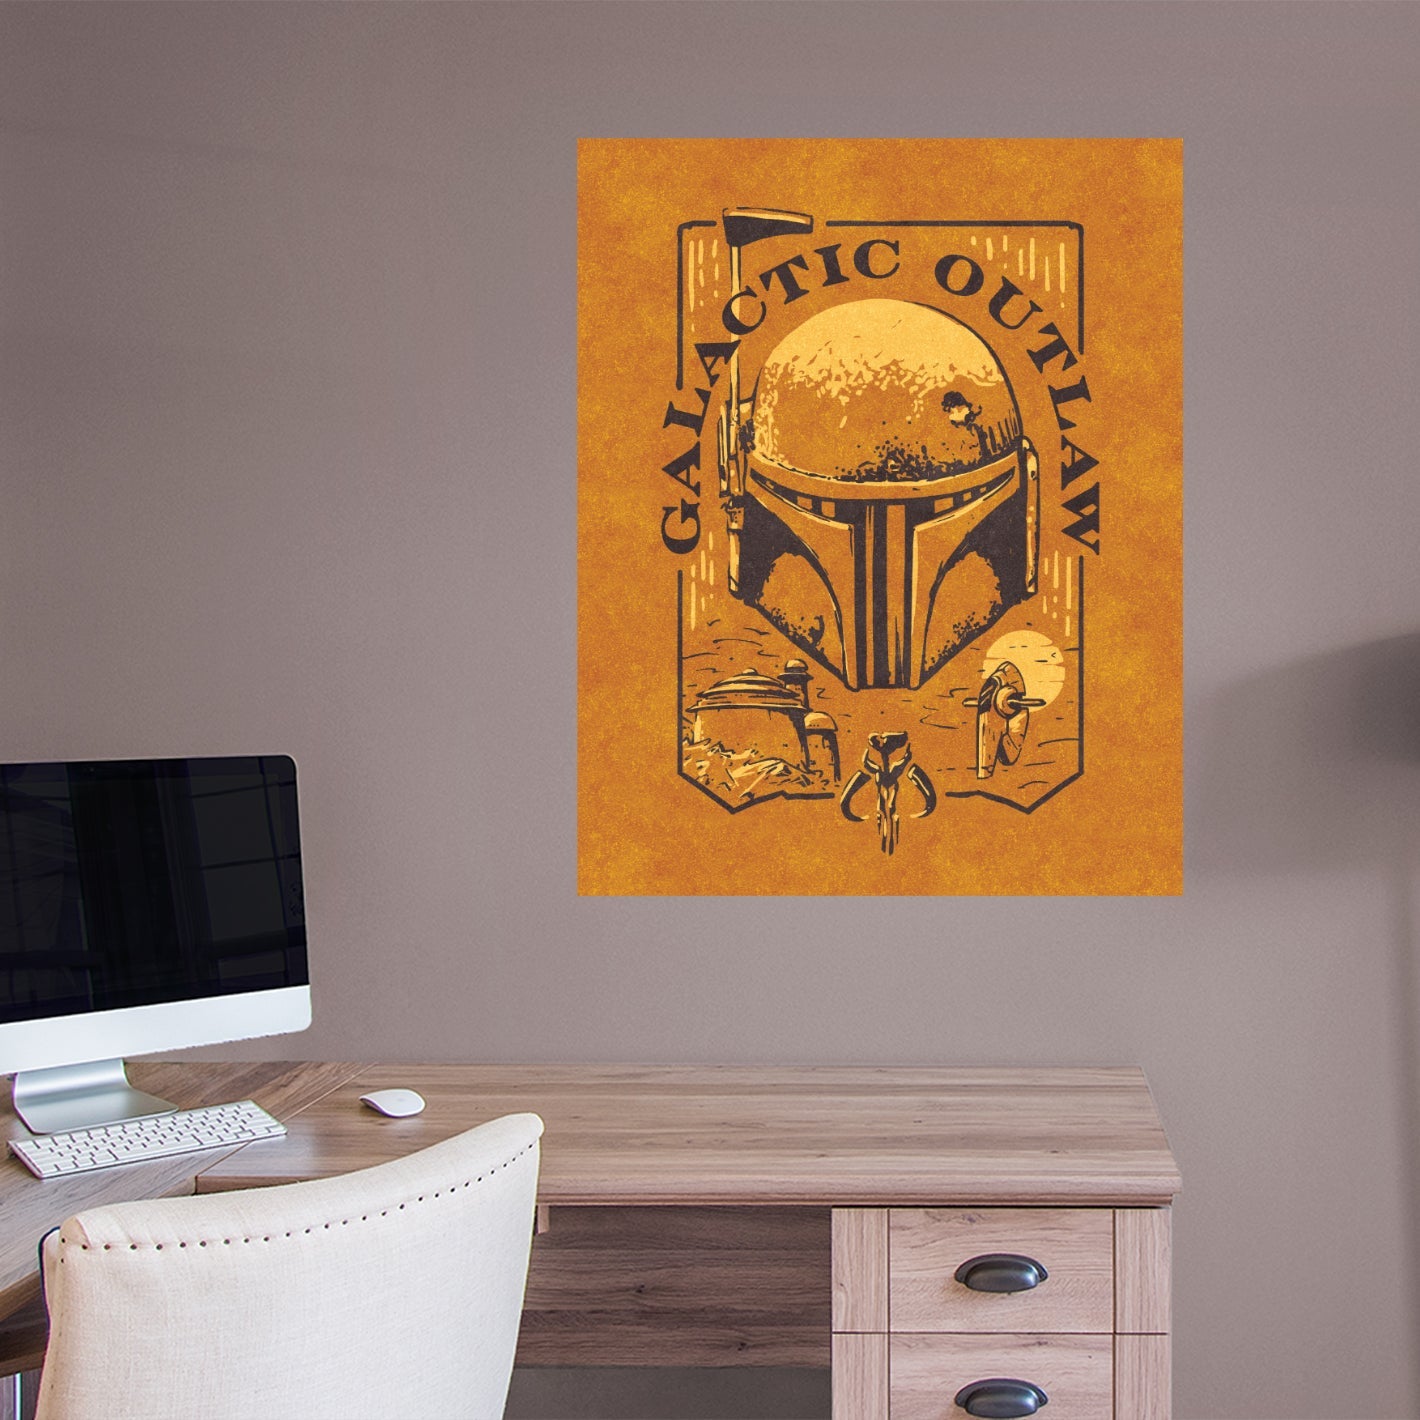 Book of Boba Fett: Boba Fett Galactic Outlaw Badge Poster - Officially Licensed Star Wars Removable Adhesive Decal